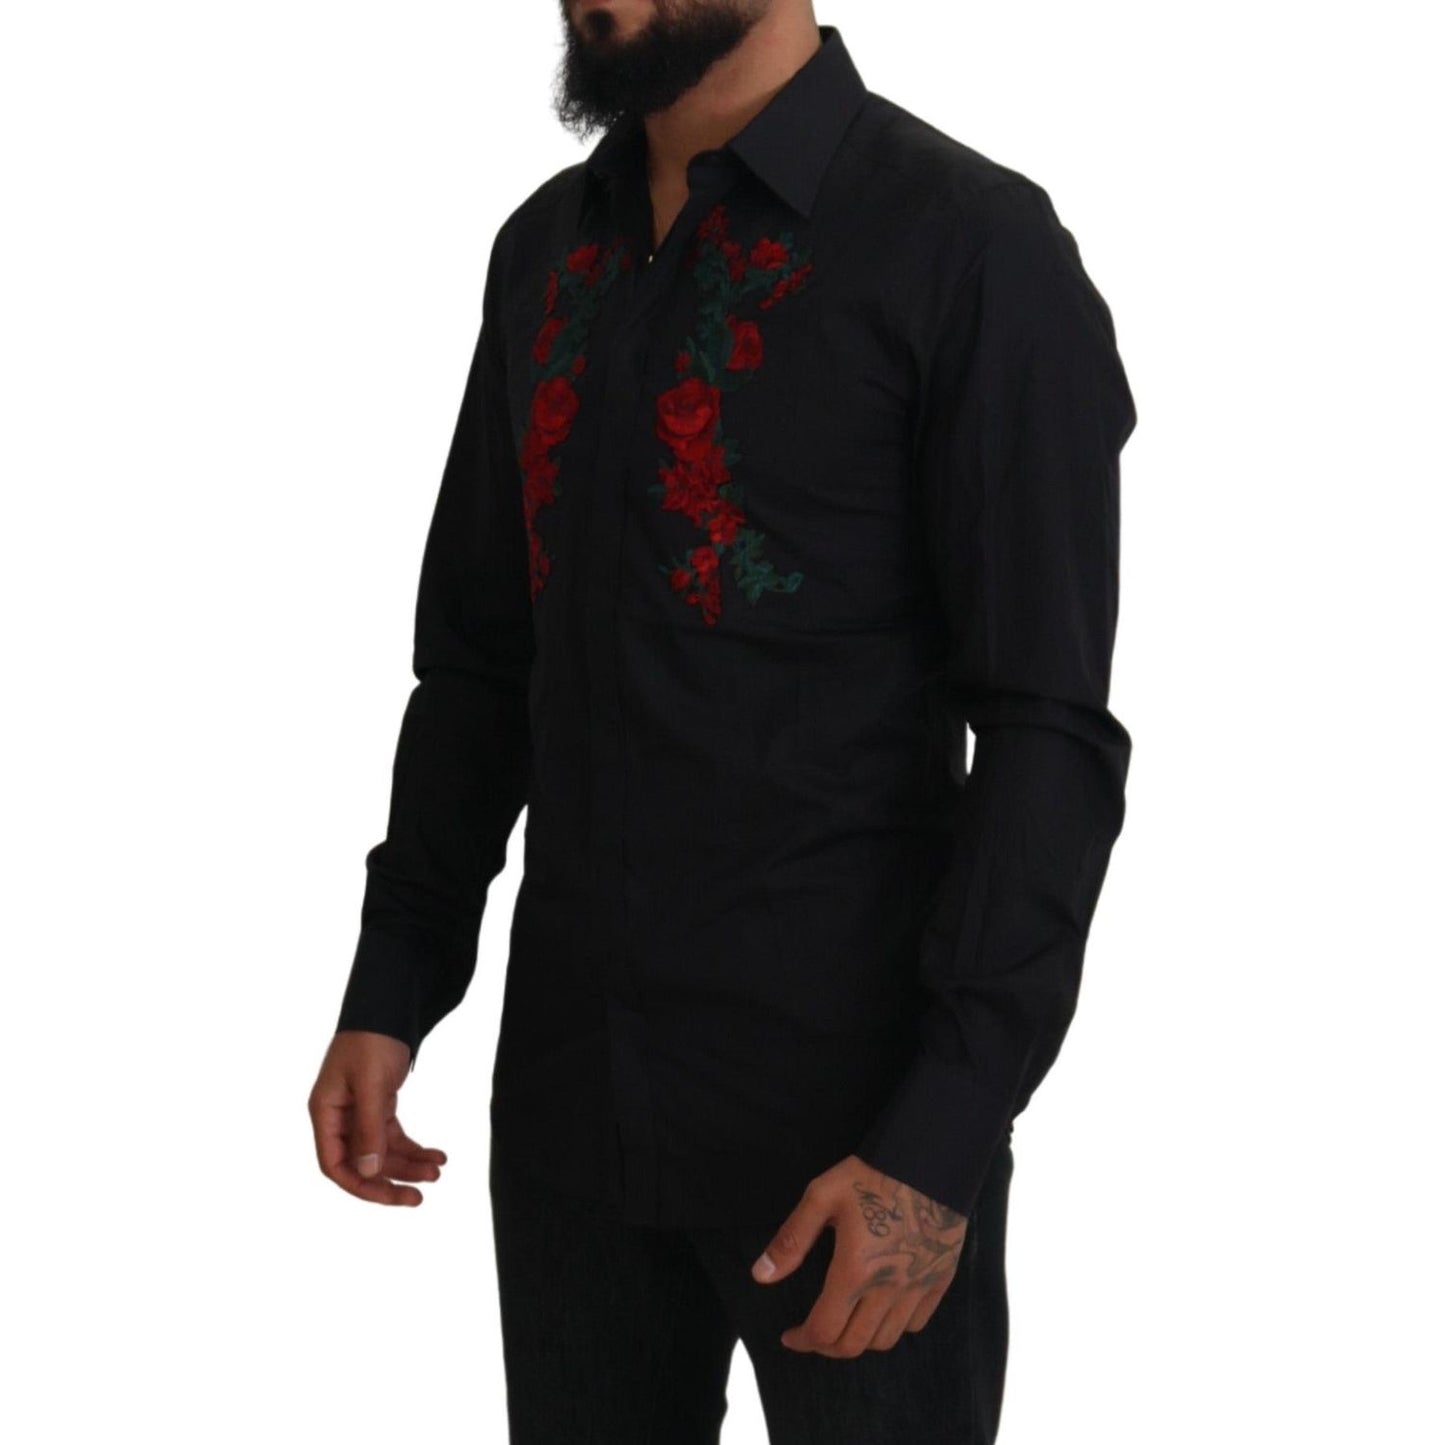 Dolce & Gabbana Elegant Floral Embroidered Cotton Shirt black-floral-embroidery-men-long-sleeves-gold-shirt IMG_6991-1ac499c8-1aa.jpg